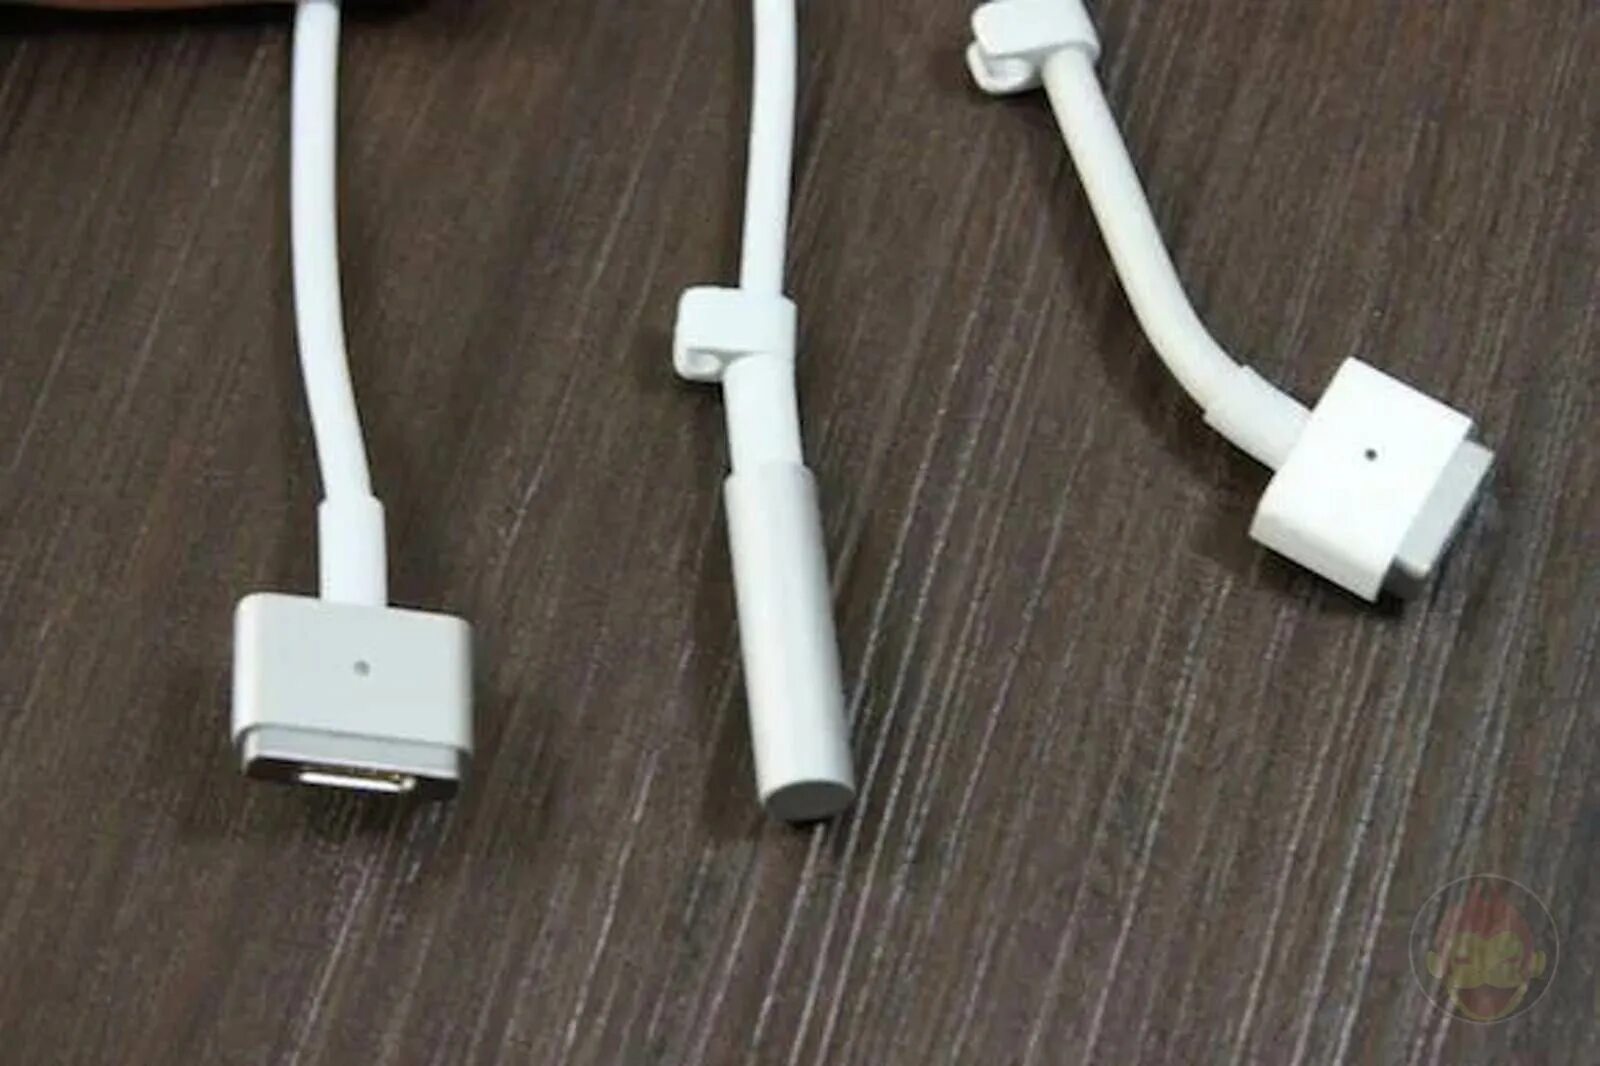 Apple MAGSAFE Duo Charger. MAGSAFE 3 in 1. MAGSAFE Charger mhxh3ze/a. MAGSAFE 1 MAGSAFE 2. Magsafe айфон оригинал